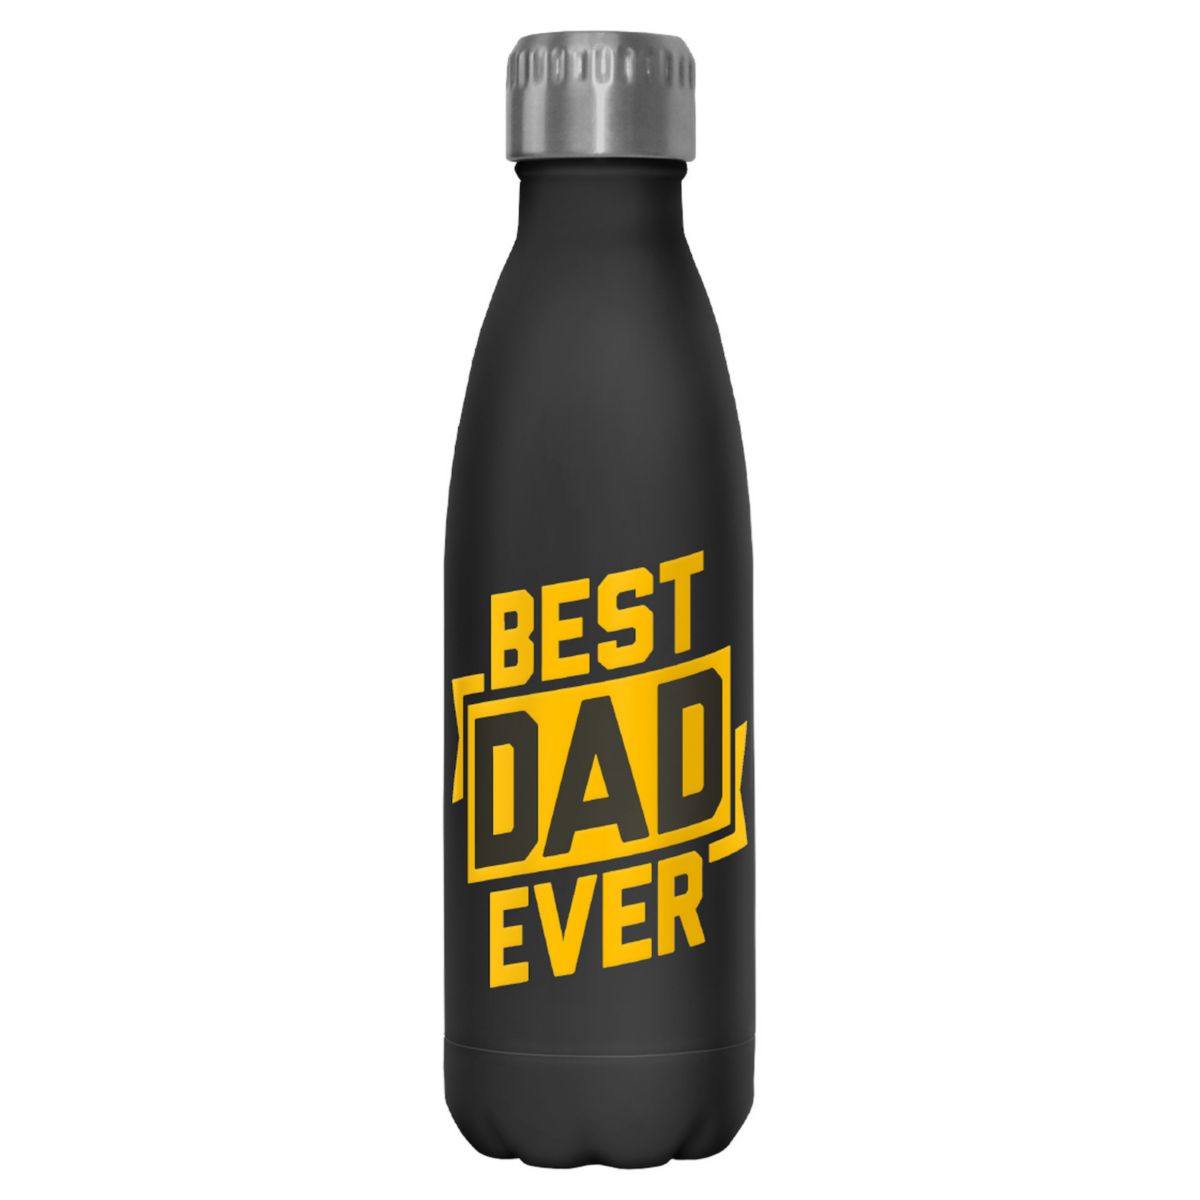 Best Dad Ever Banner 17-oz. Stainless Steel Bottle Licensed Character